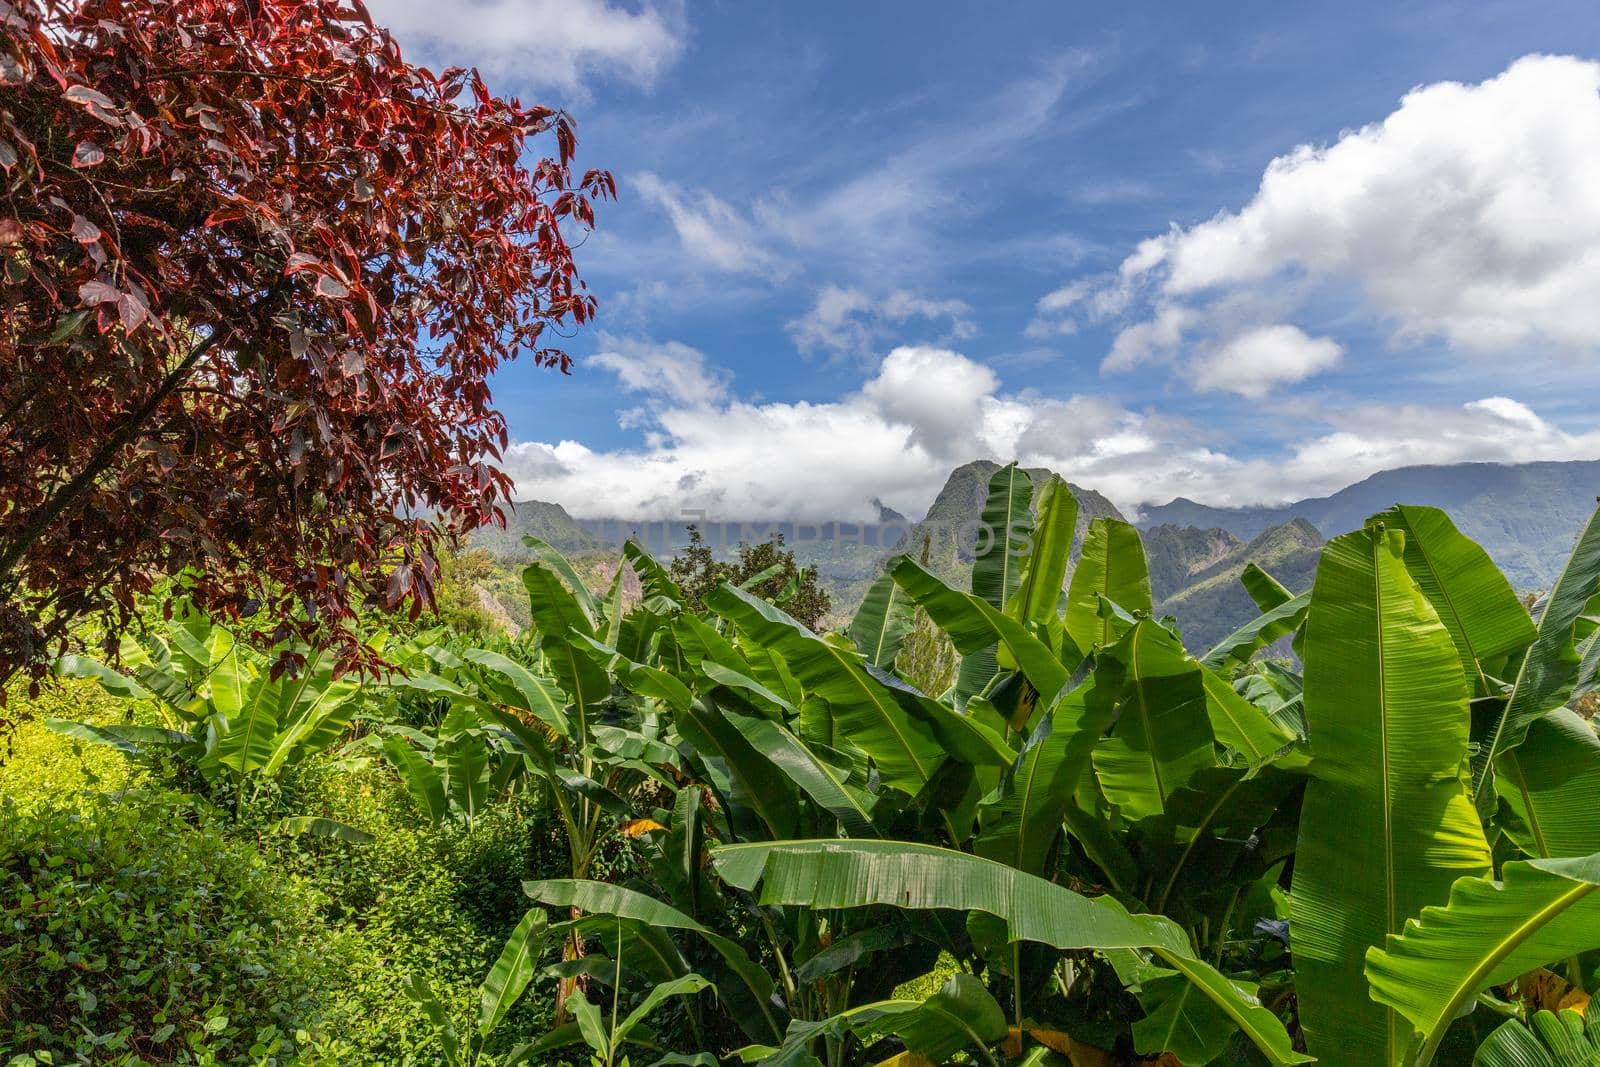 Scenic view of a green landscape with mountain range in the background, trees, colored plants in front at island Reunion in the indian ocean on a sunny day with blue sky and white clouds